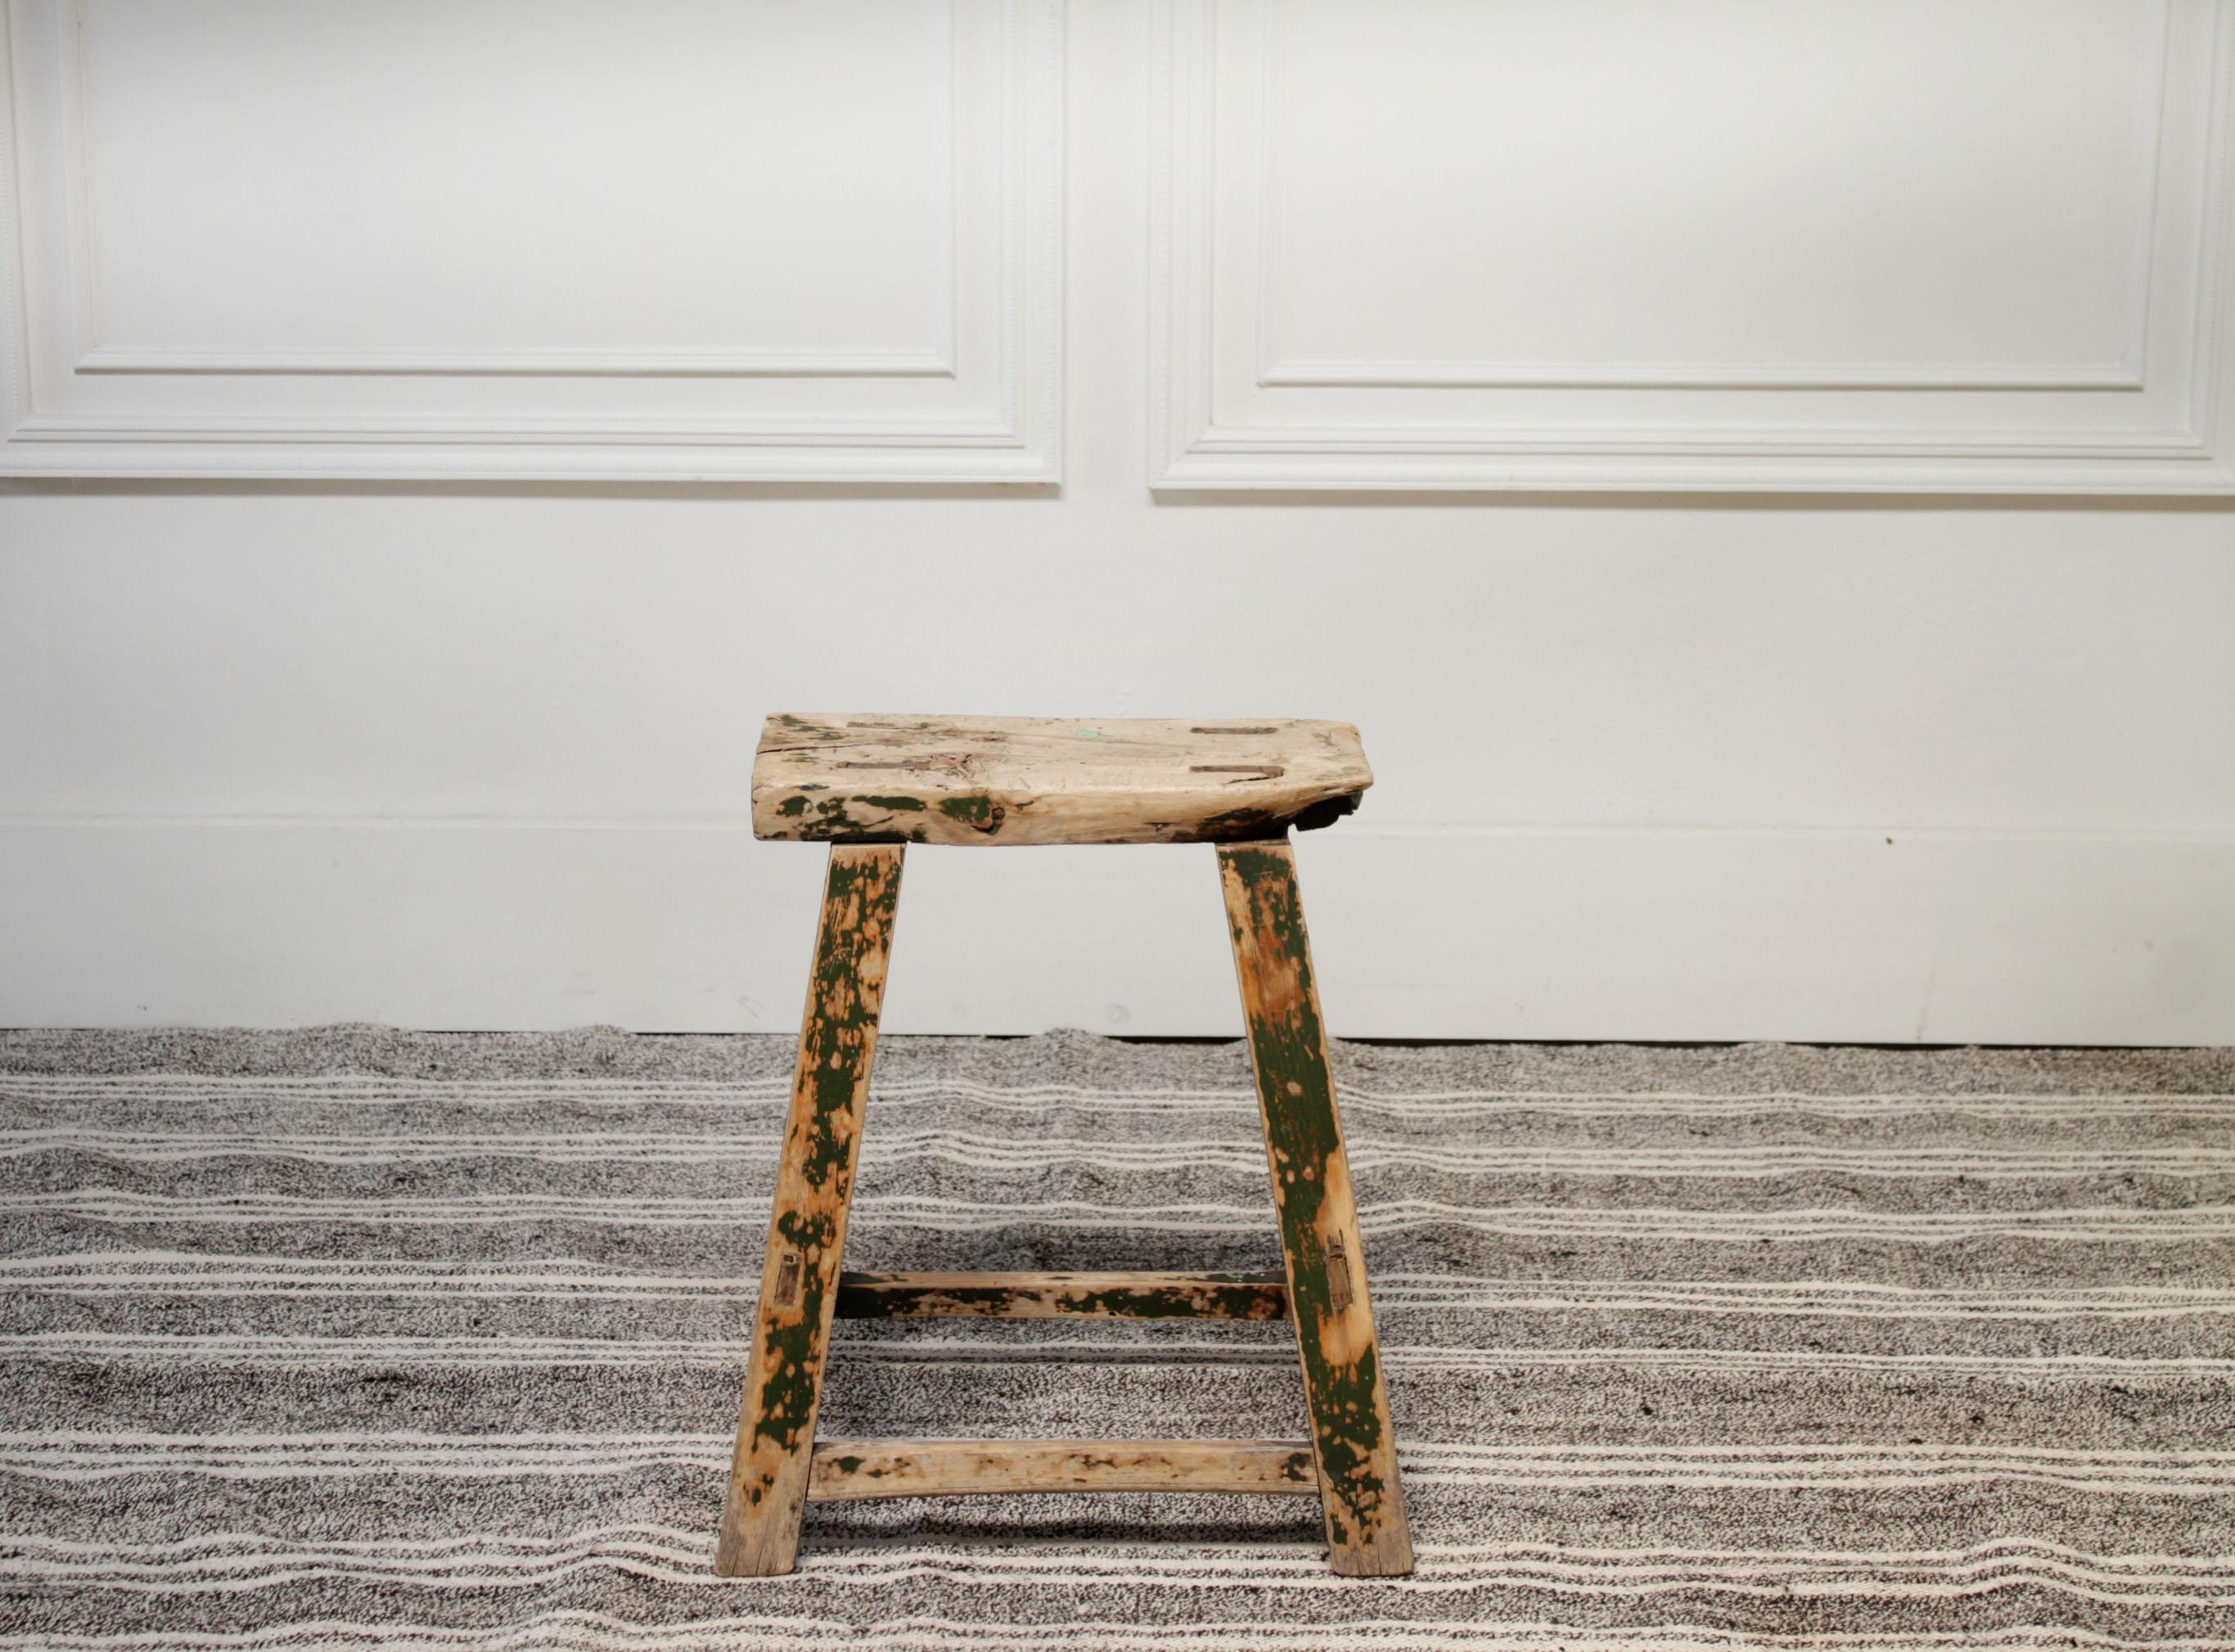 Antique Chinese elmwood painted stool
Original paint on some areas that has been weathered away. A dark green color fading to expose a natural light elmwood. We love using these next to a sofa as a side table, in between chairs or even in a bath